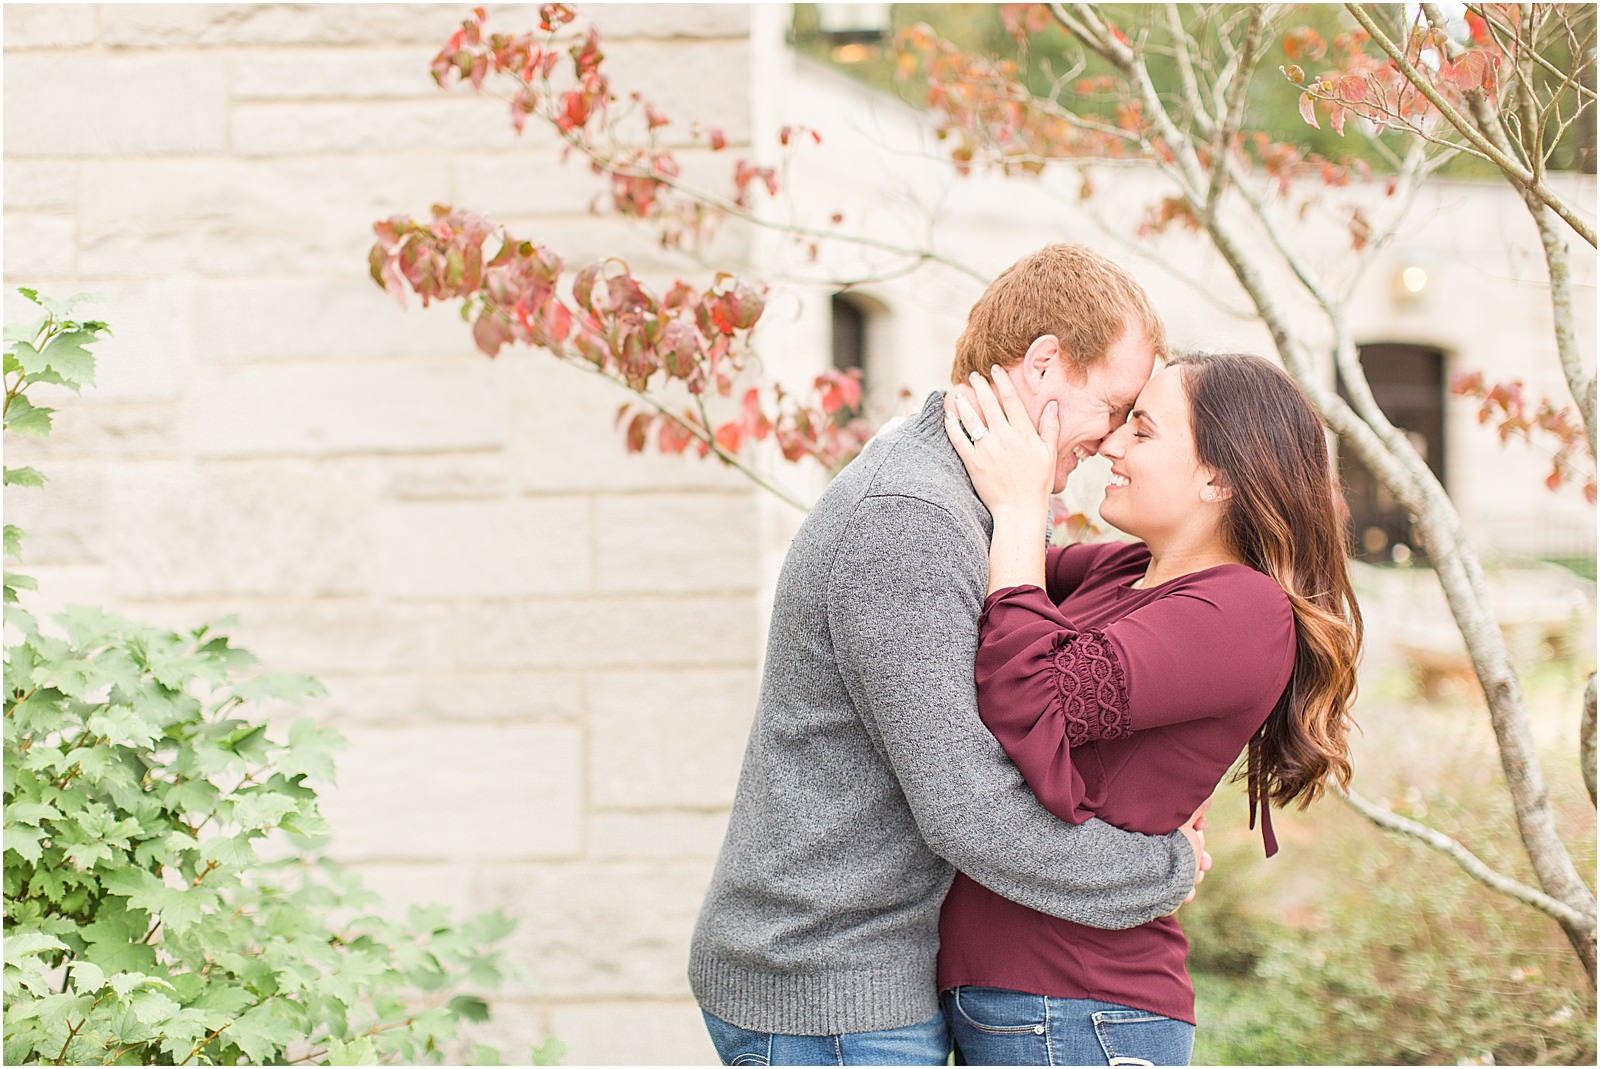 A Lincoln State Park Engagemtent Session | Deidra and Andrew | Bret and Brandie Photography 0013.jpg